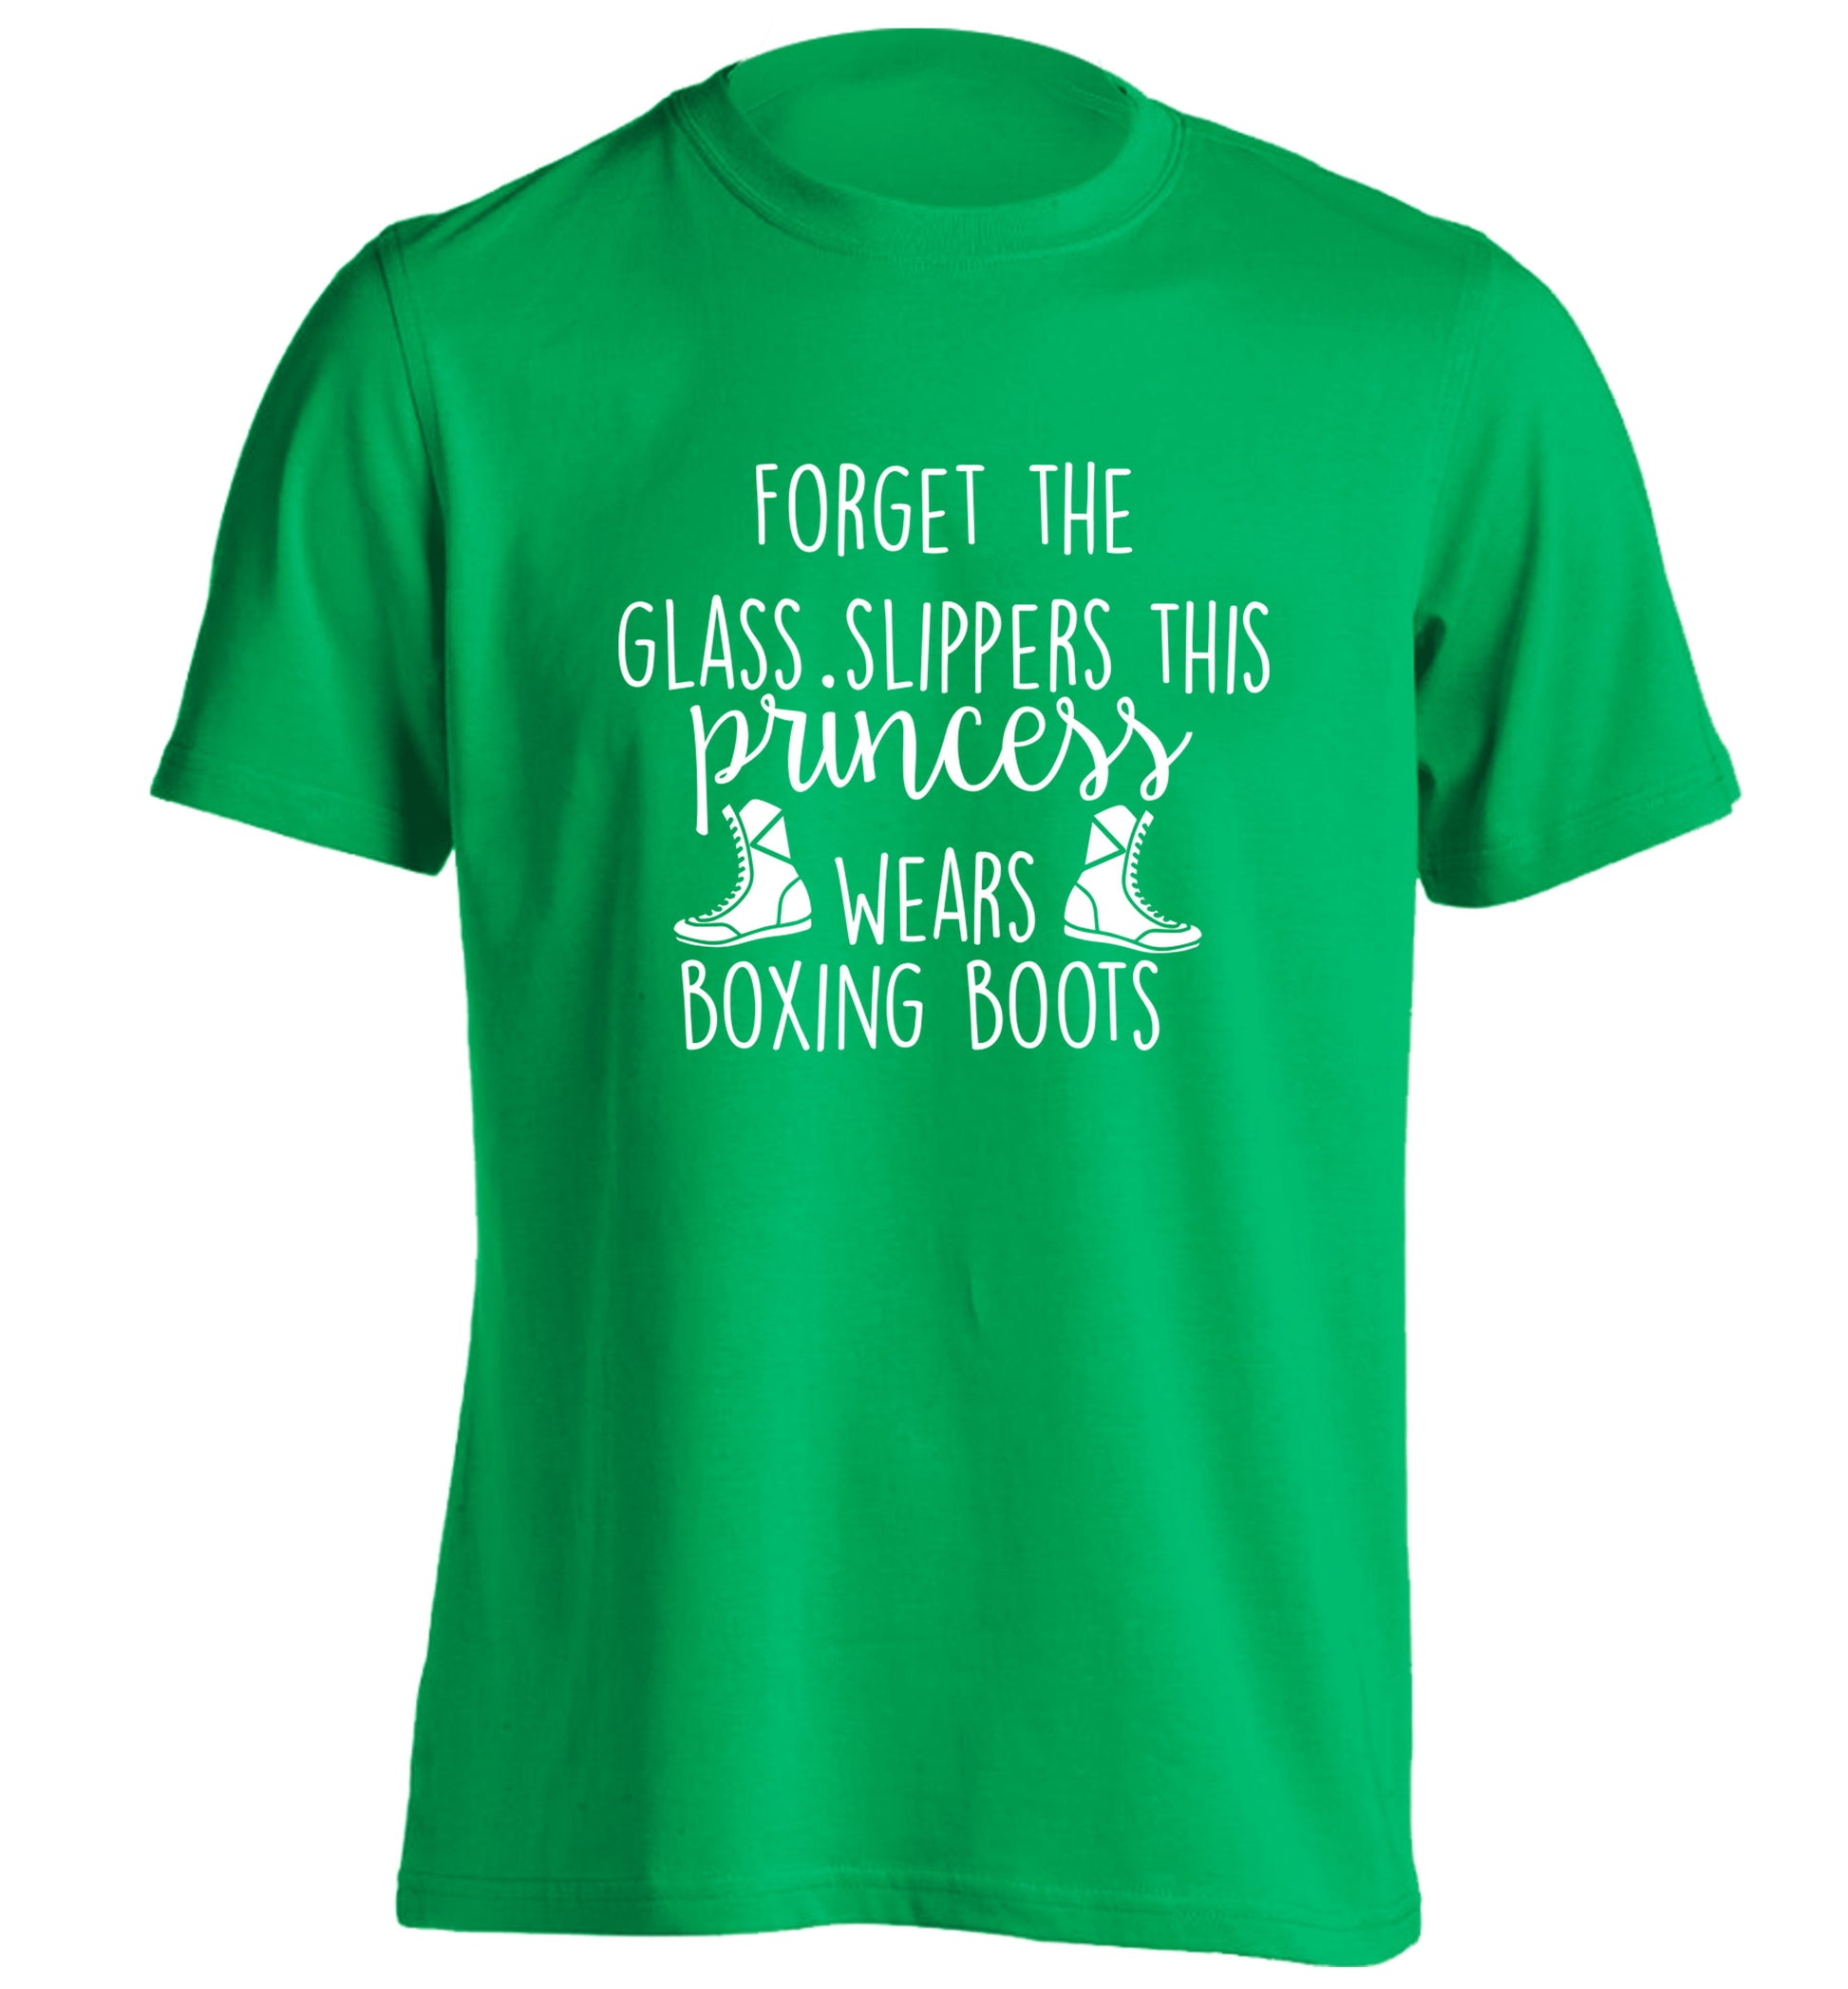 Forget the glass slippers this princess wears boxing boots adults unisex green Tshirt 2XL